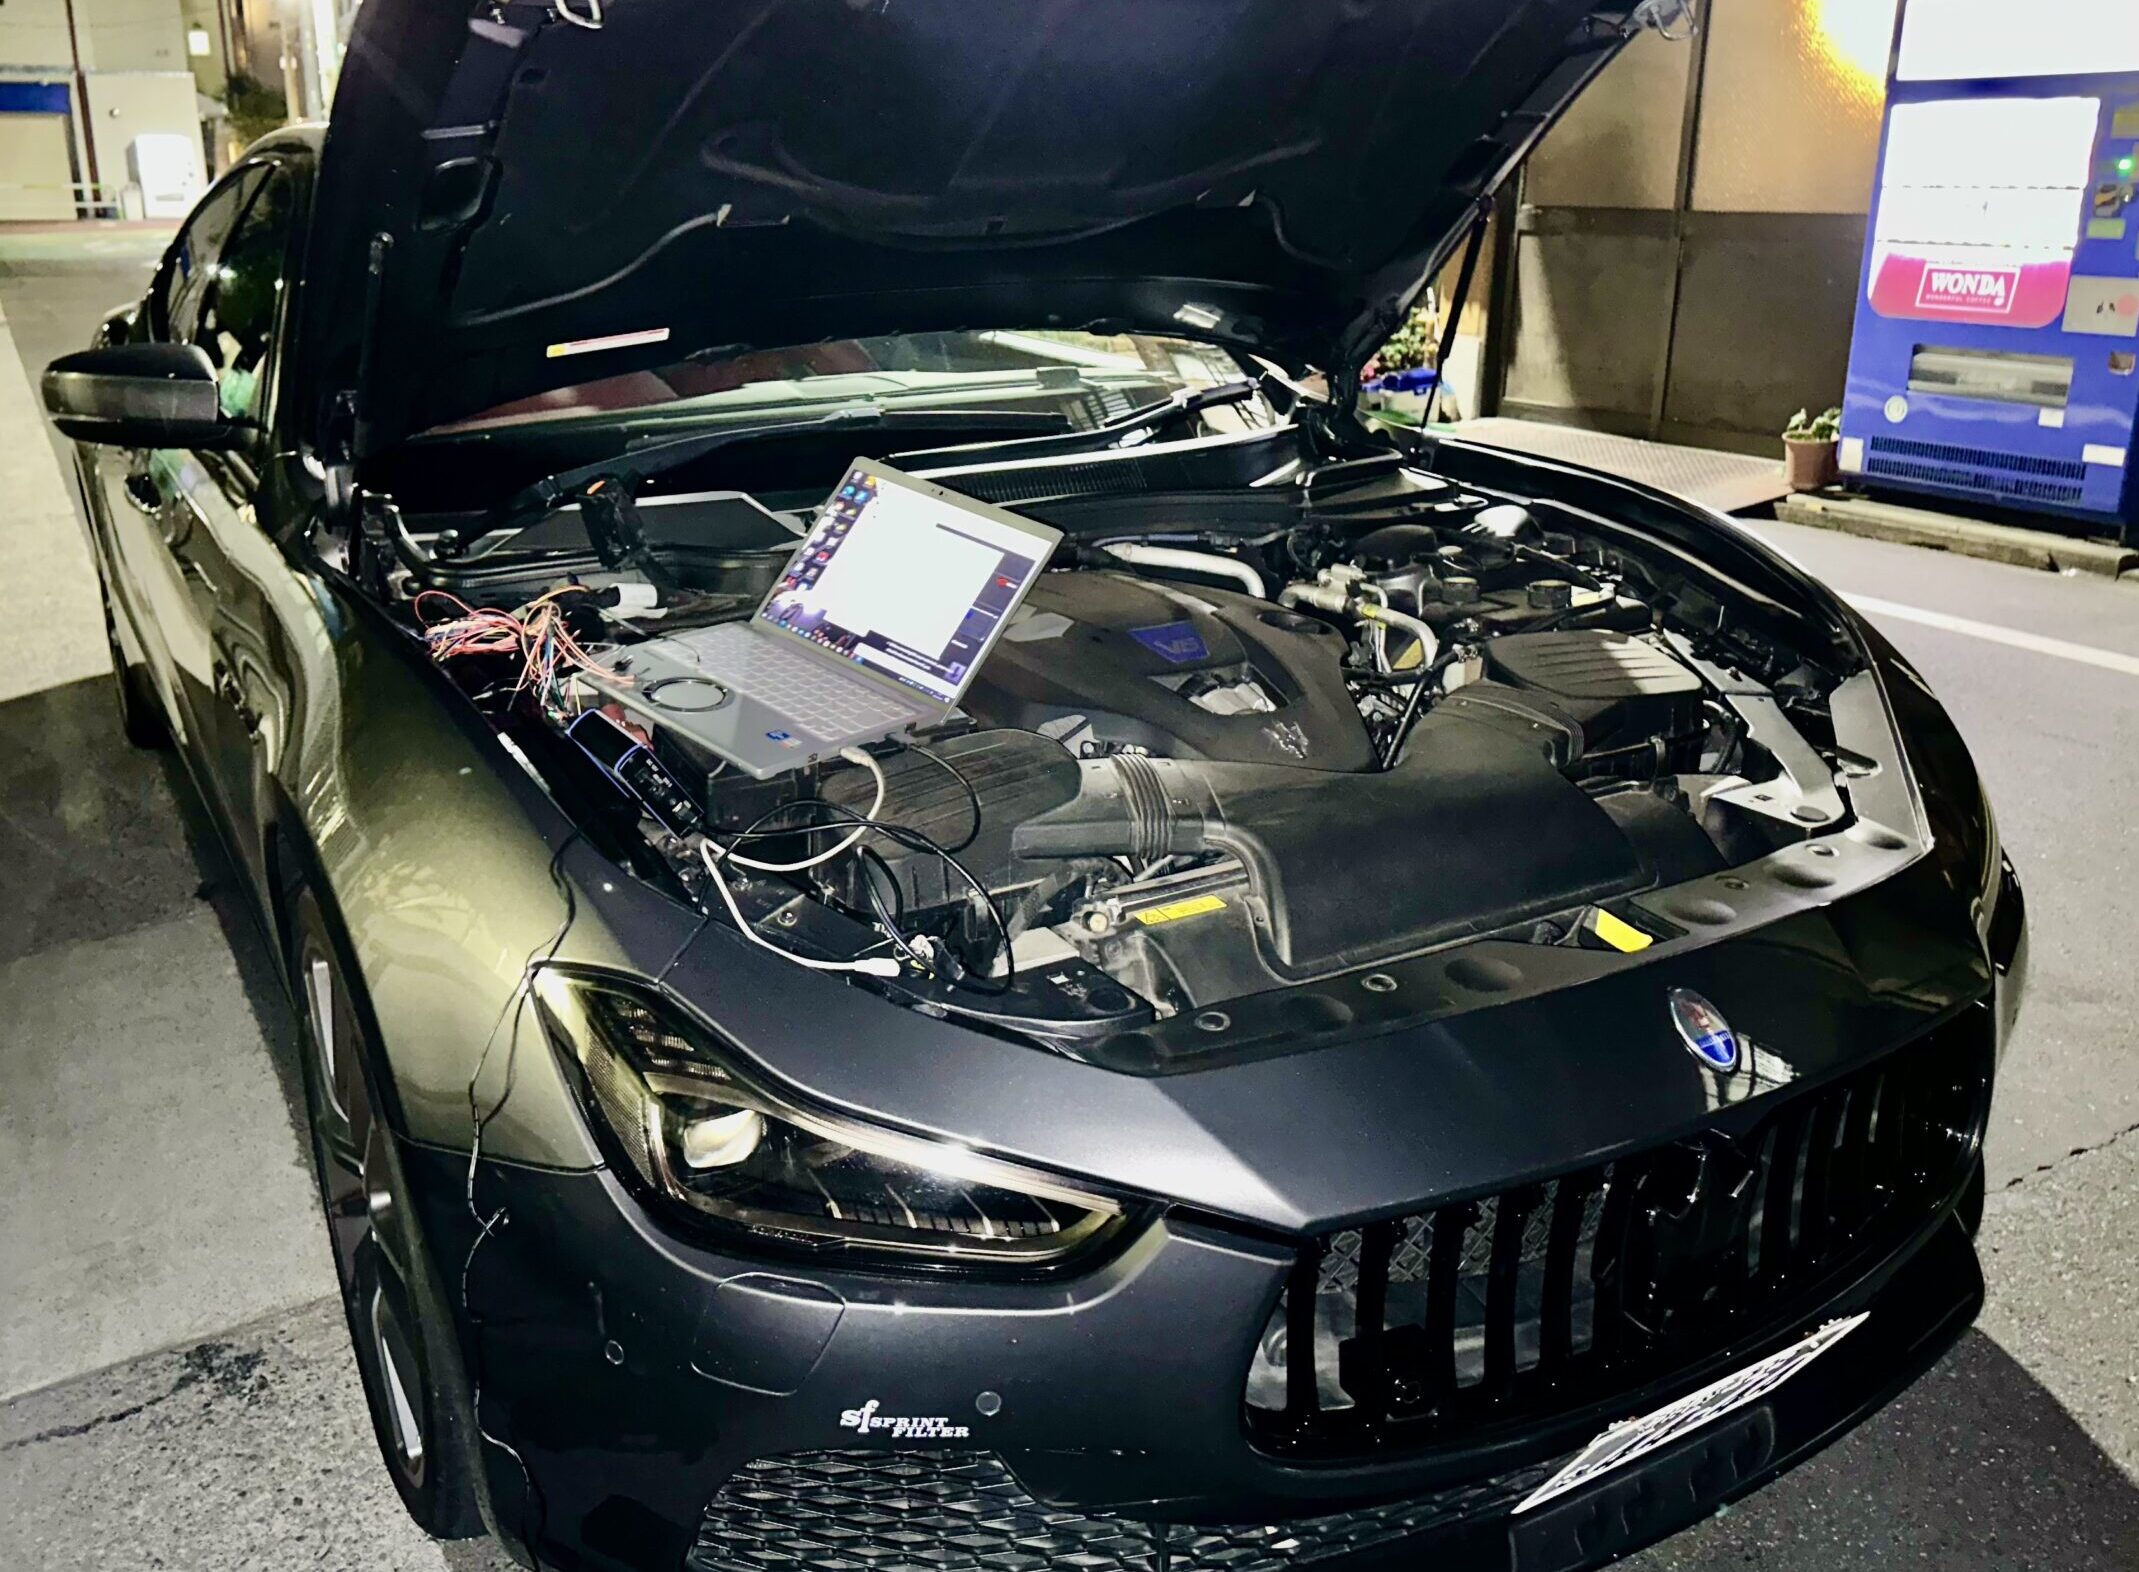 MASERATI GHIBLI S ECU rewritten for 480 hp and bubbling* ESP lights all over!